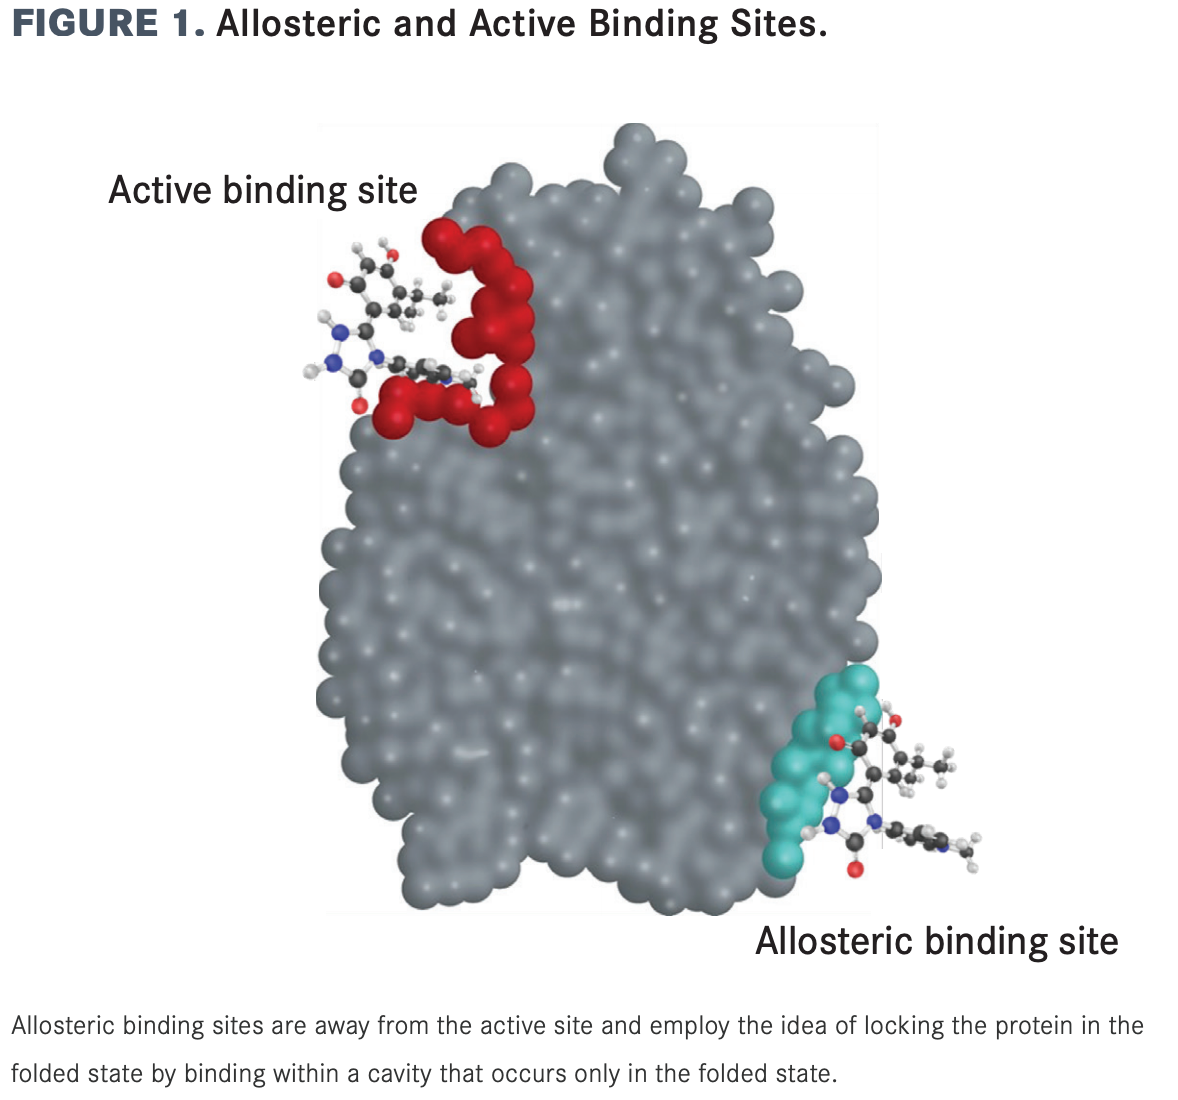 FIGURE 1. Allosteric and Active Binding Sites. (Click to enlarge)